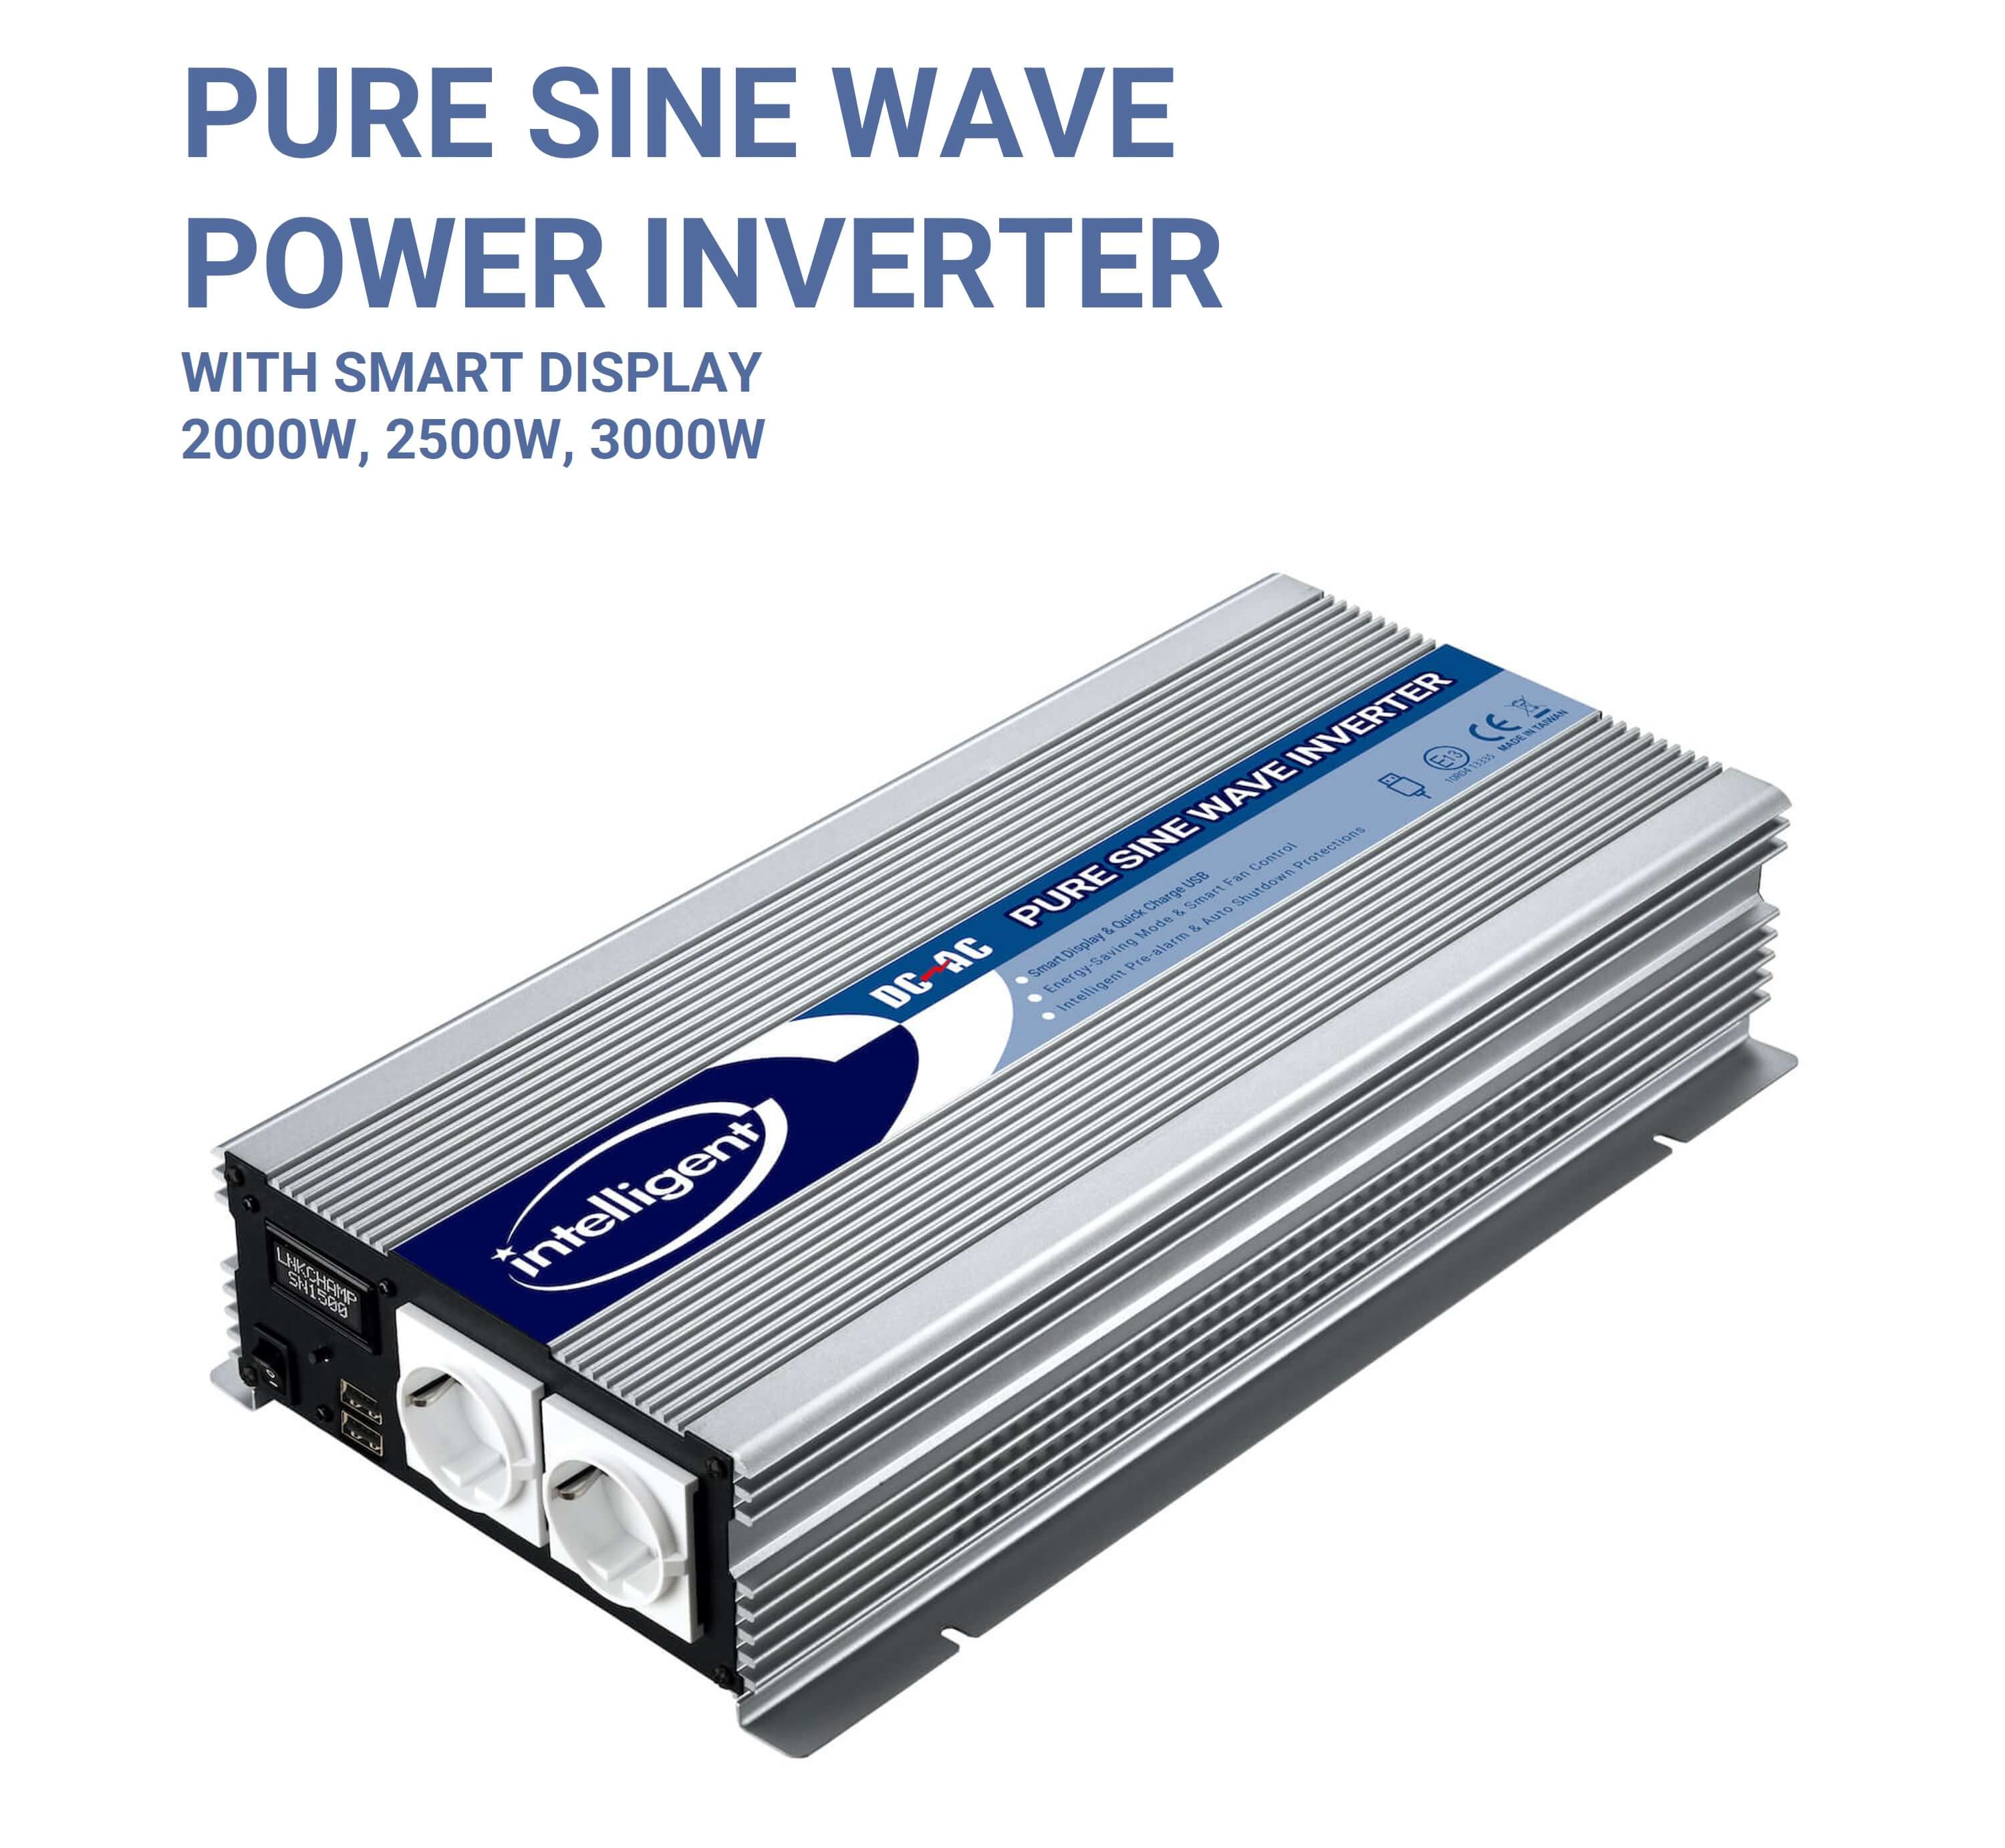 Kings 3000W Pure Sine Wave Inverter - 1 Stop Camping Shop